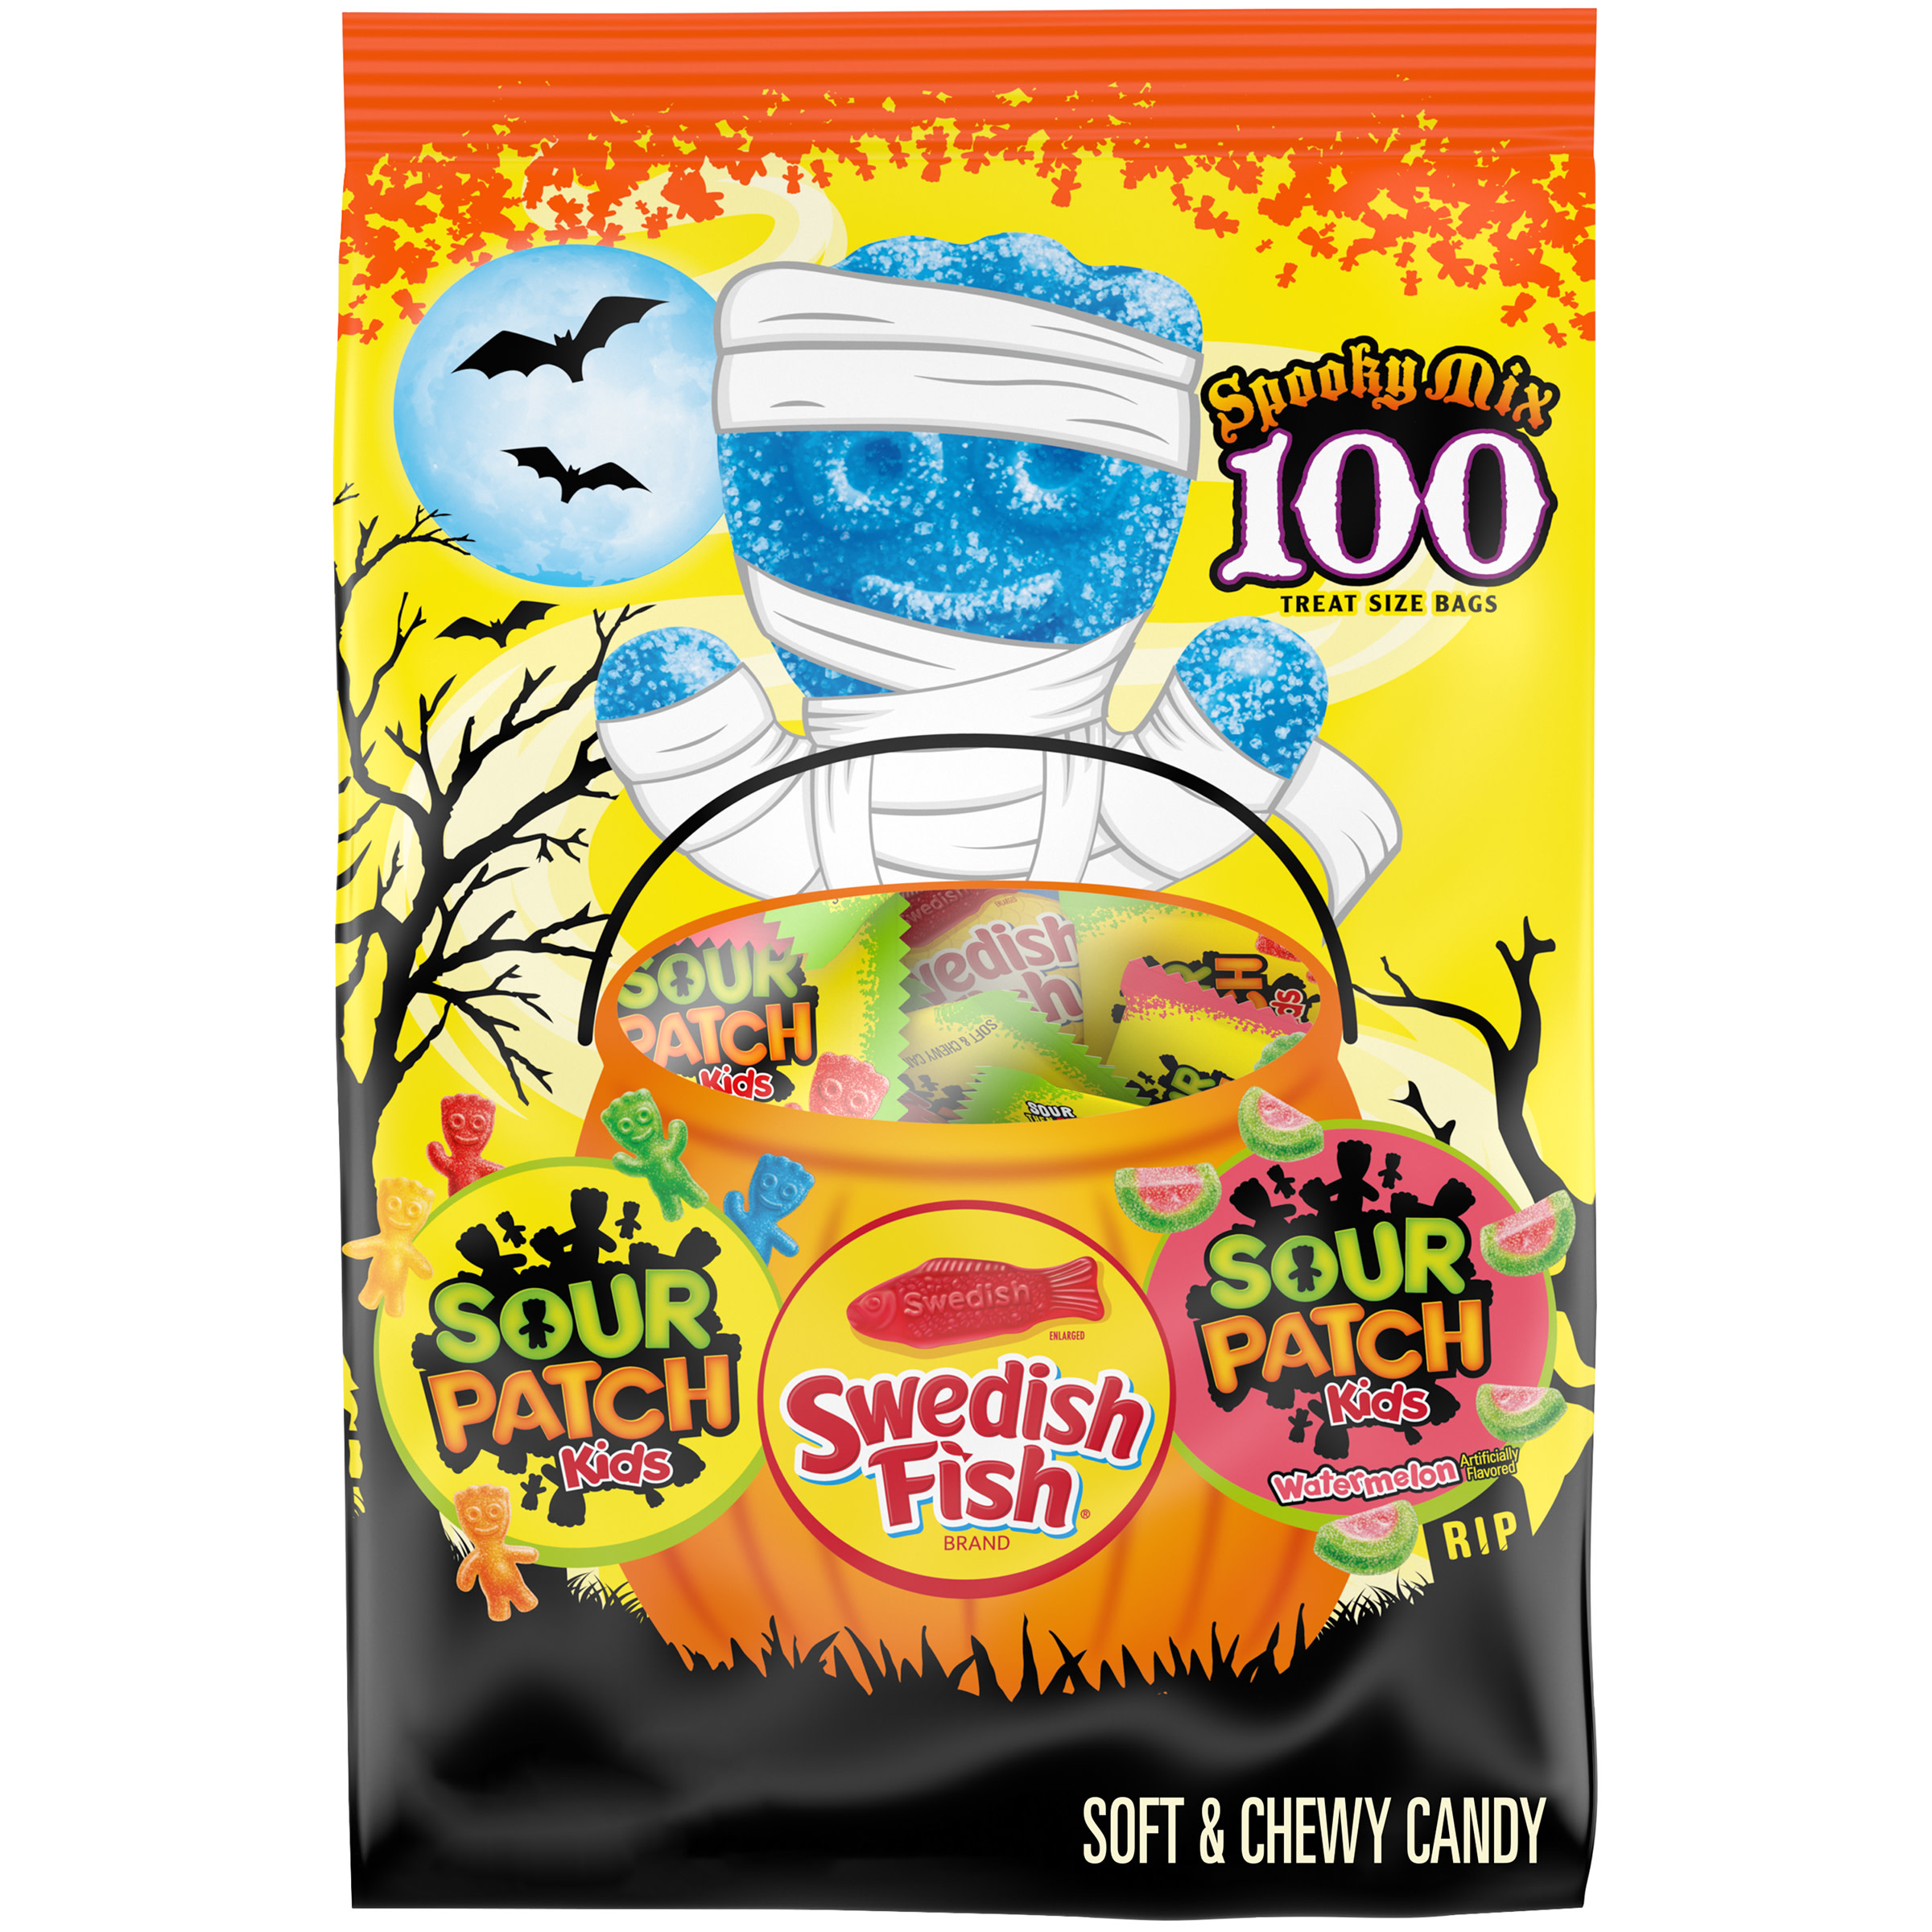 SOUR PATCH KIDS Candy (Original and Watermelon) and SWEDISH FISH Candy Halloween Candy Variety Pack, 1 - 100 Trick or Treat Snack Packs - image 1 of 20